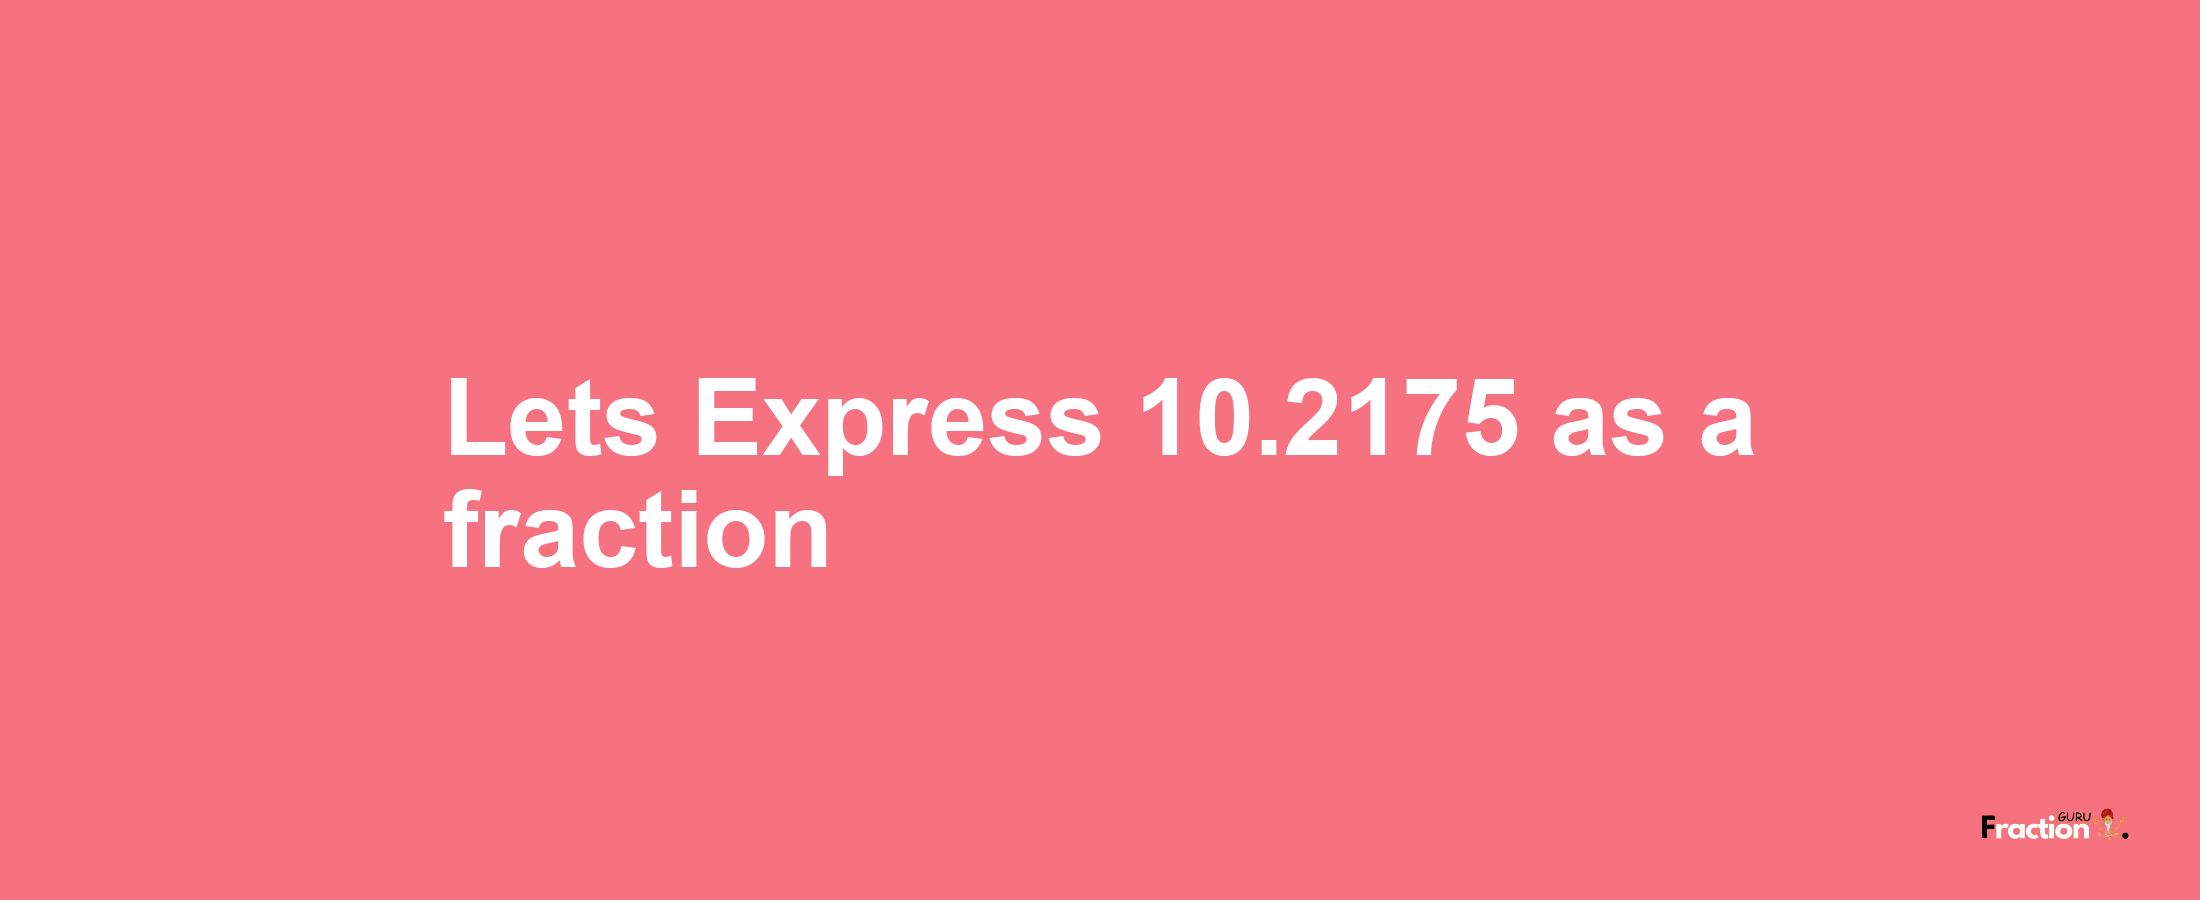 Lets Express 10.2175 as afraction